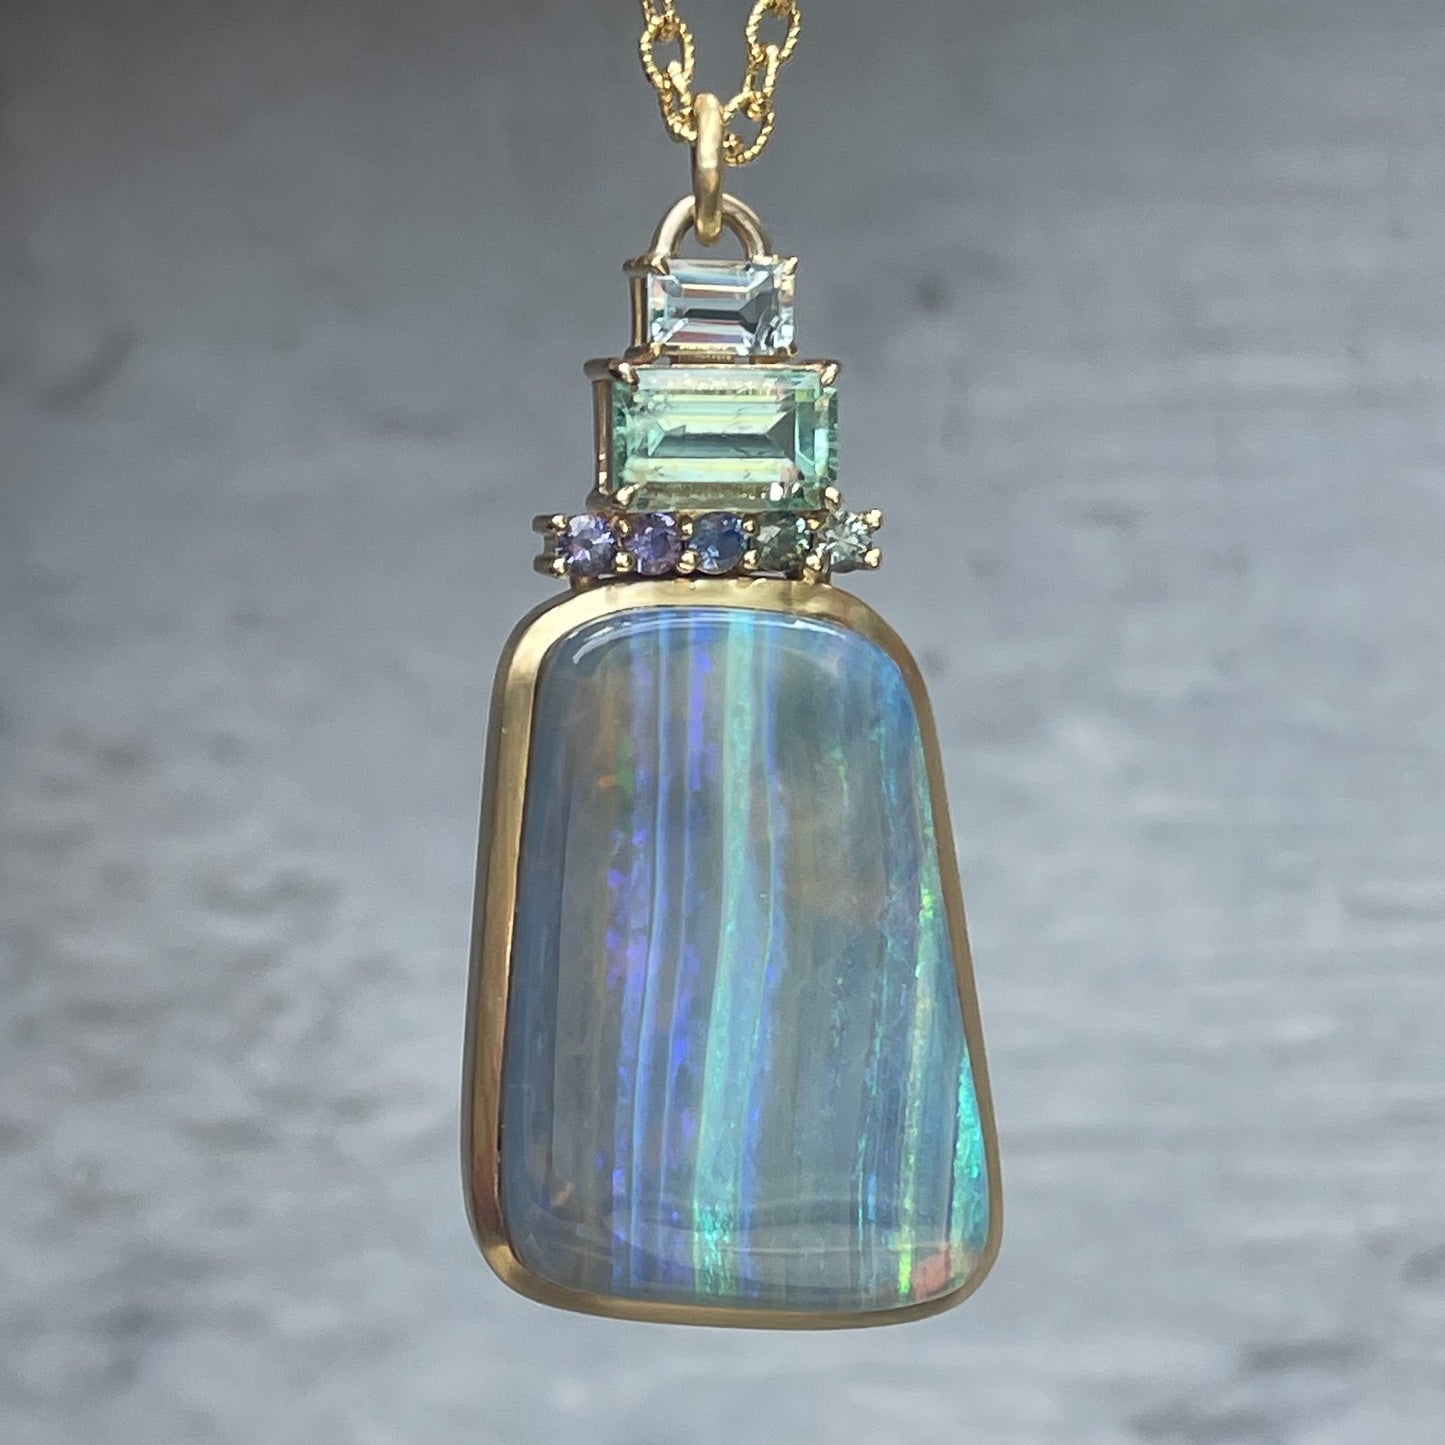 An Australian Opal Necklace by NIXIN Jewelry hangs in front of a grey wall. Atop the Blue Opal stack ombré sapphires, an emerald, and an aquamarine.